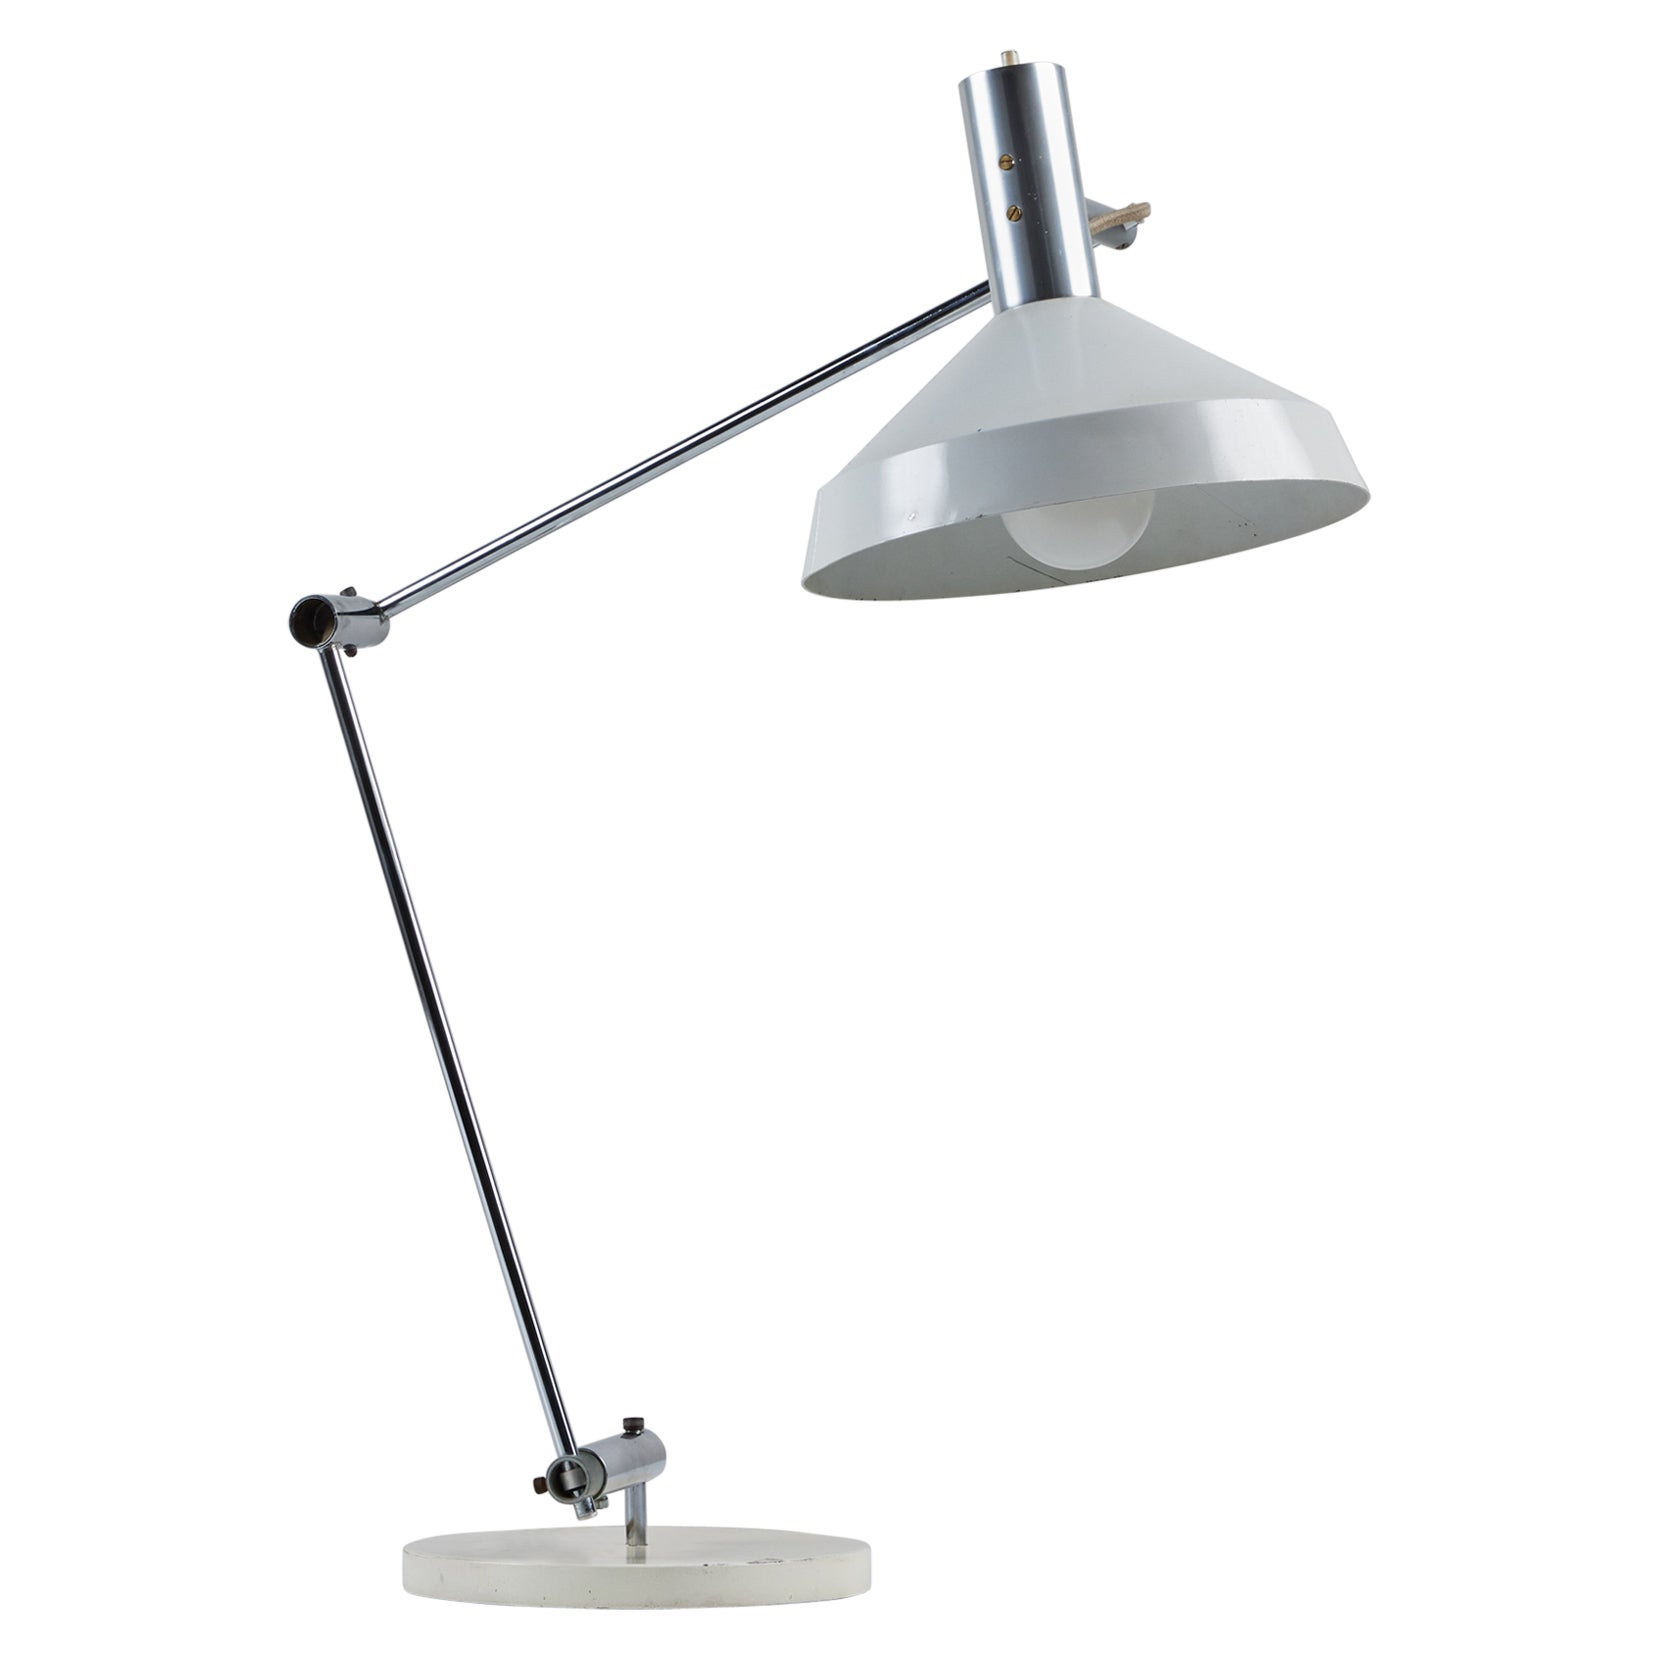 Rosemarie & Rico Baltensweiler Articulating Table Lamp For Sale